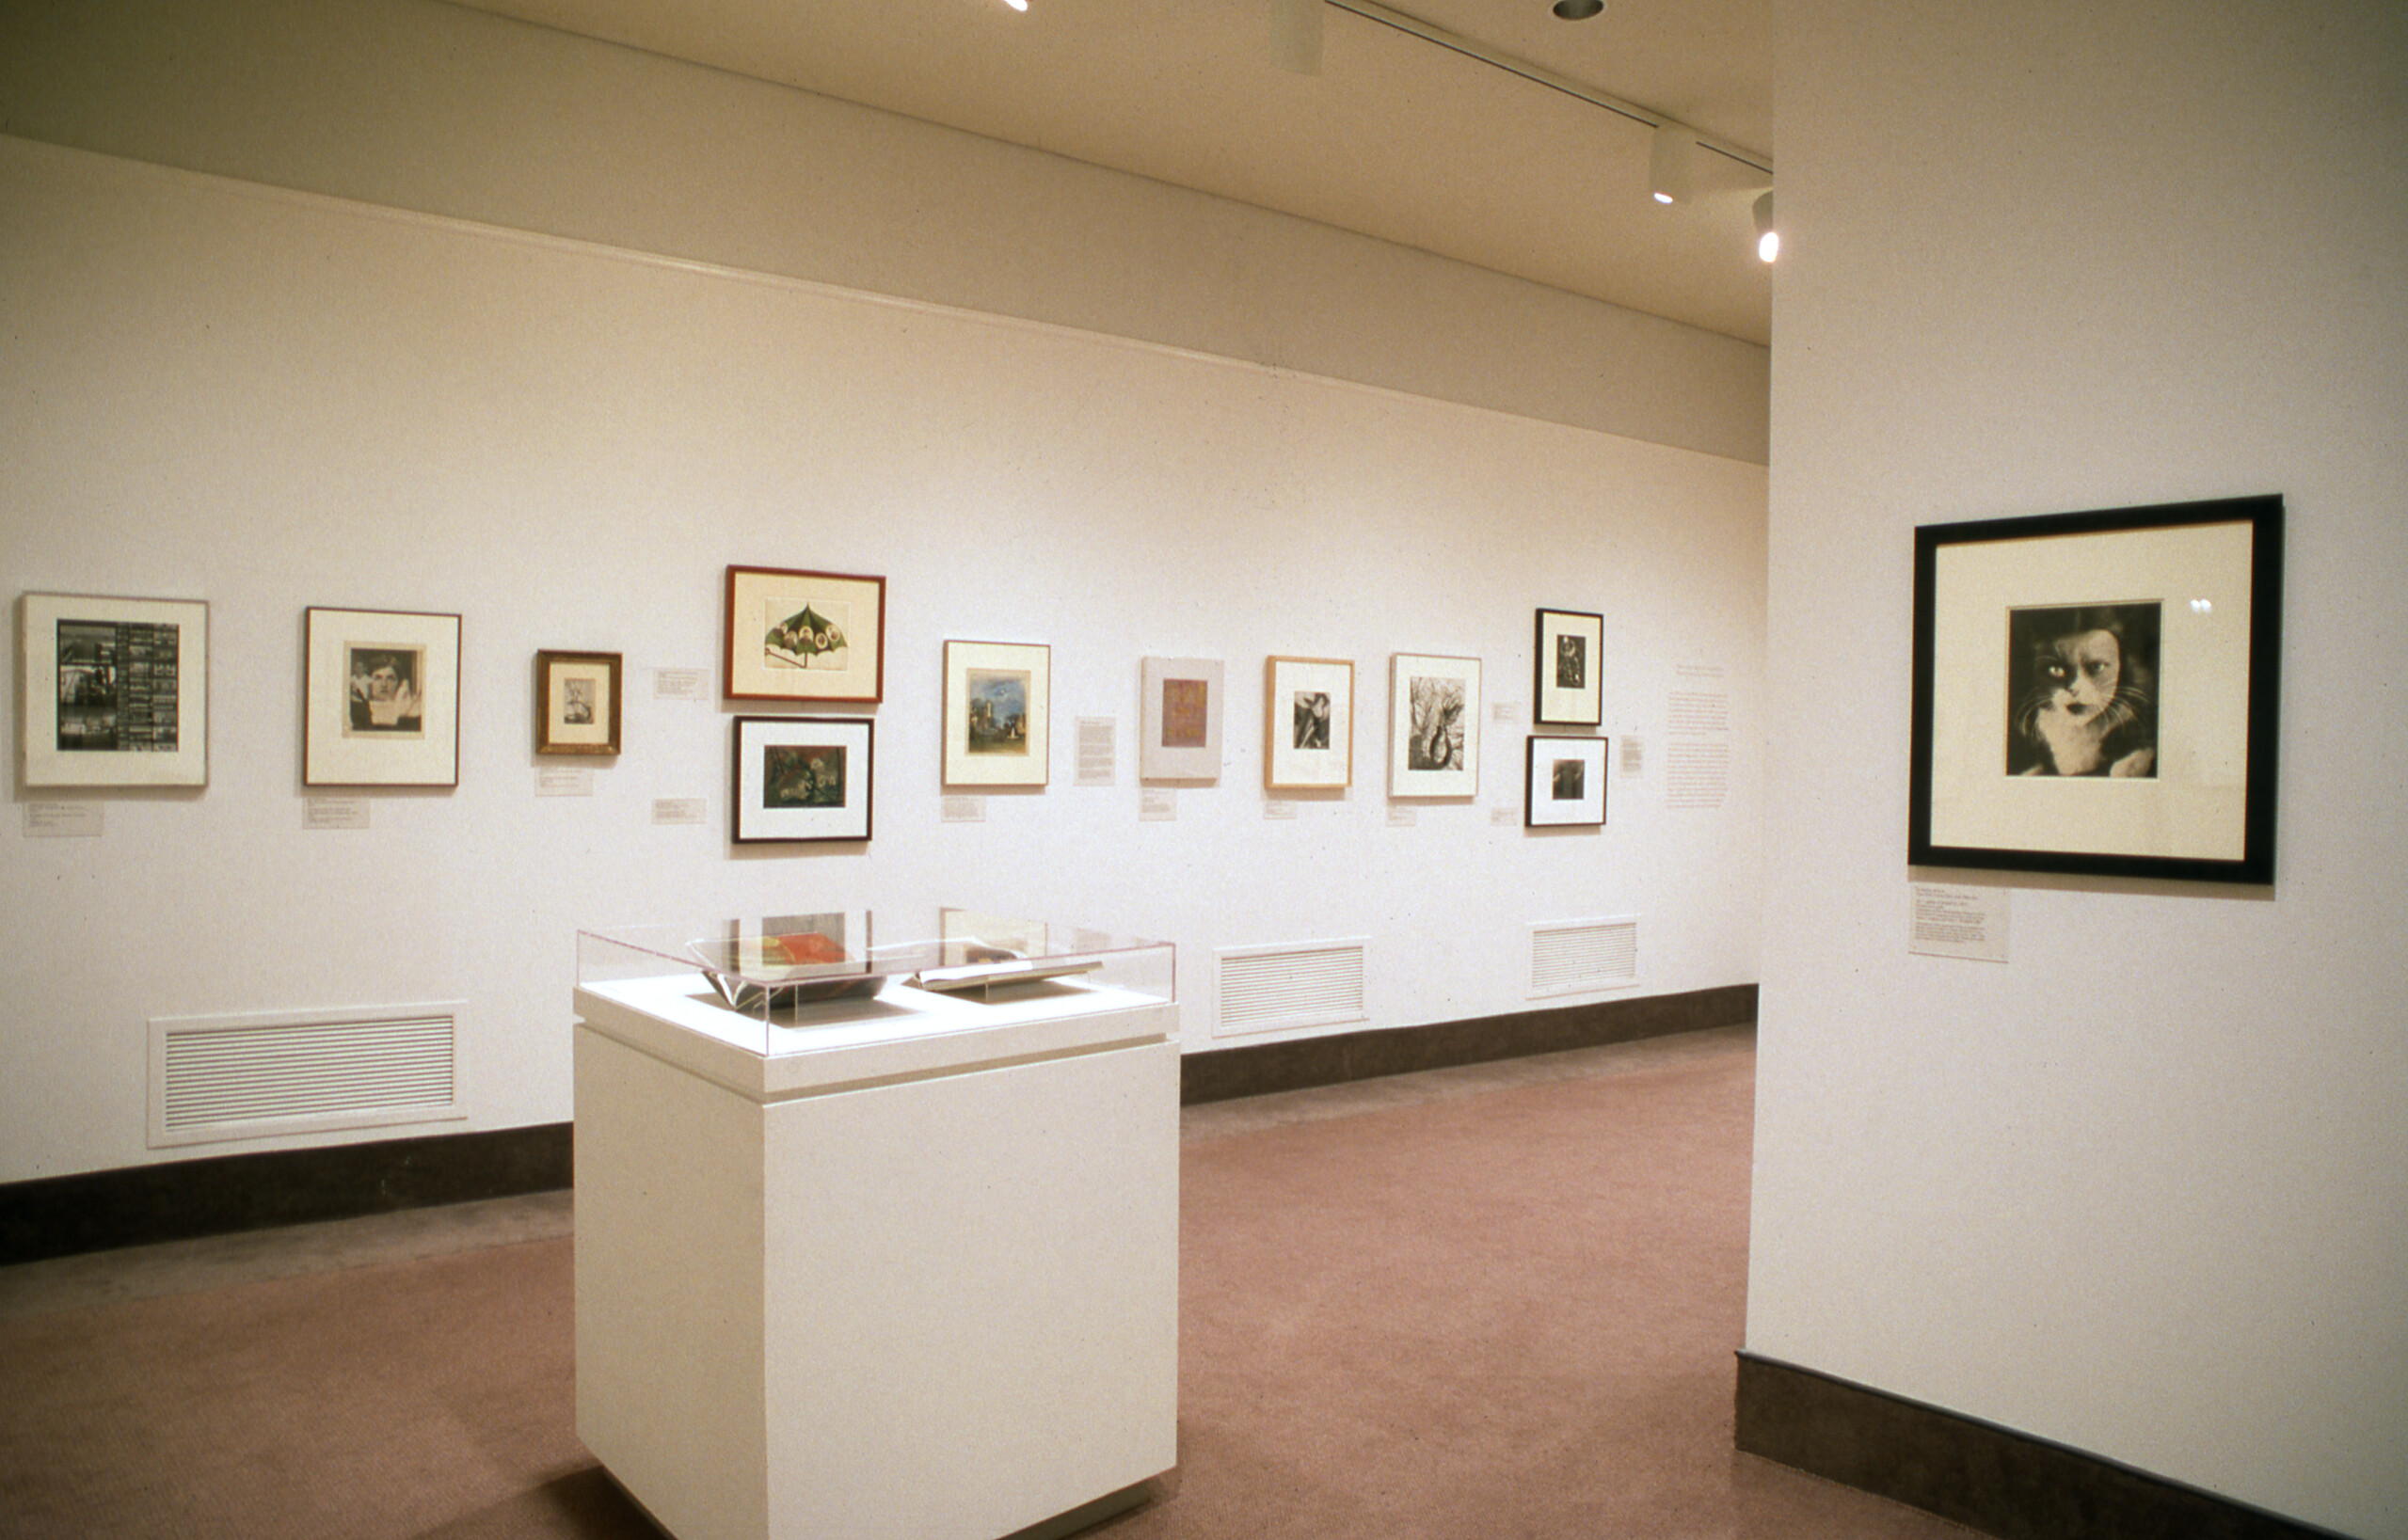 View of a gallery space covered in black-and-white photographs hanging on each wall.